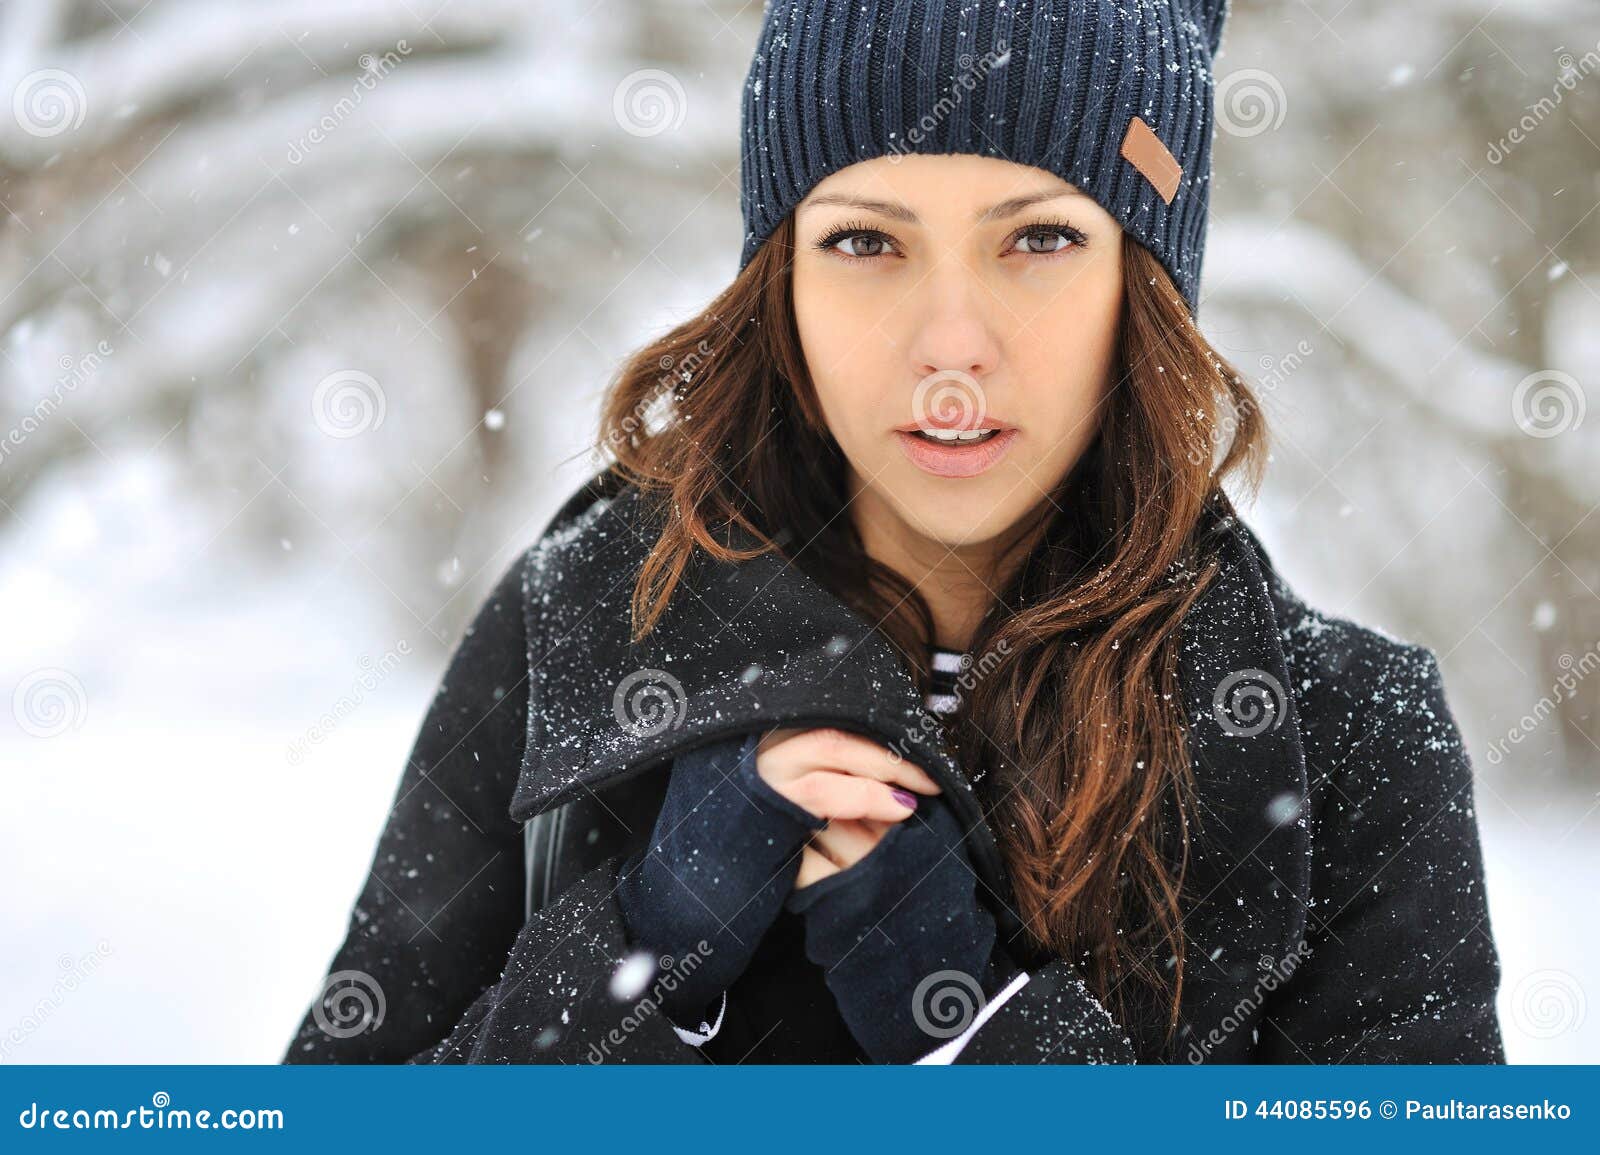 Attractive Young Woman in Wintertime Outdoor Stock Photo - Image of ...